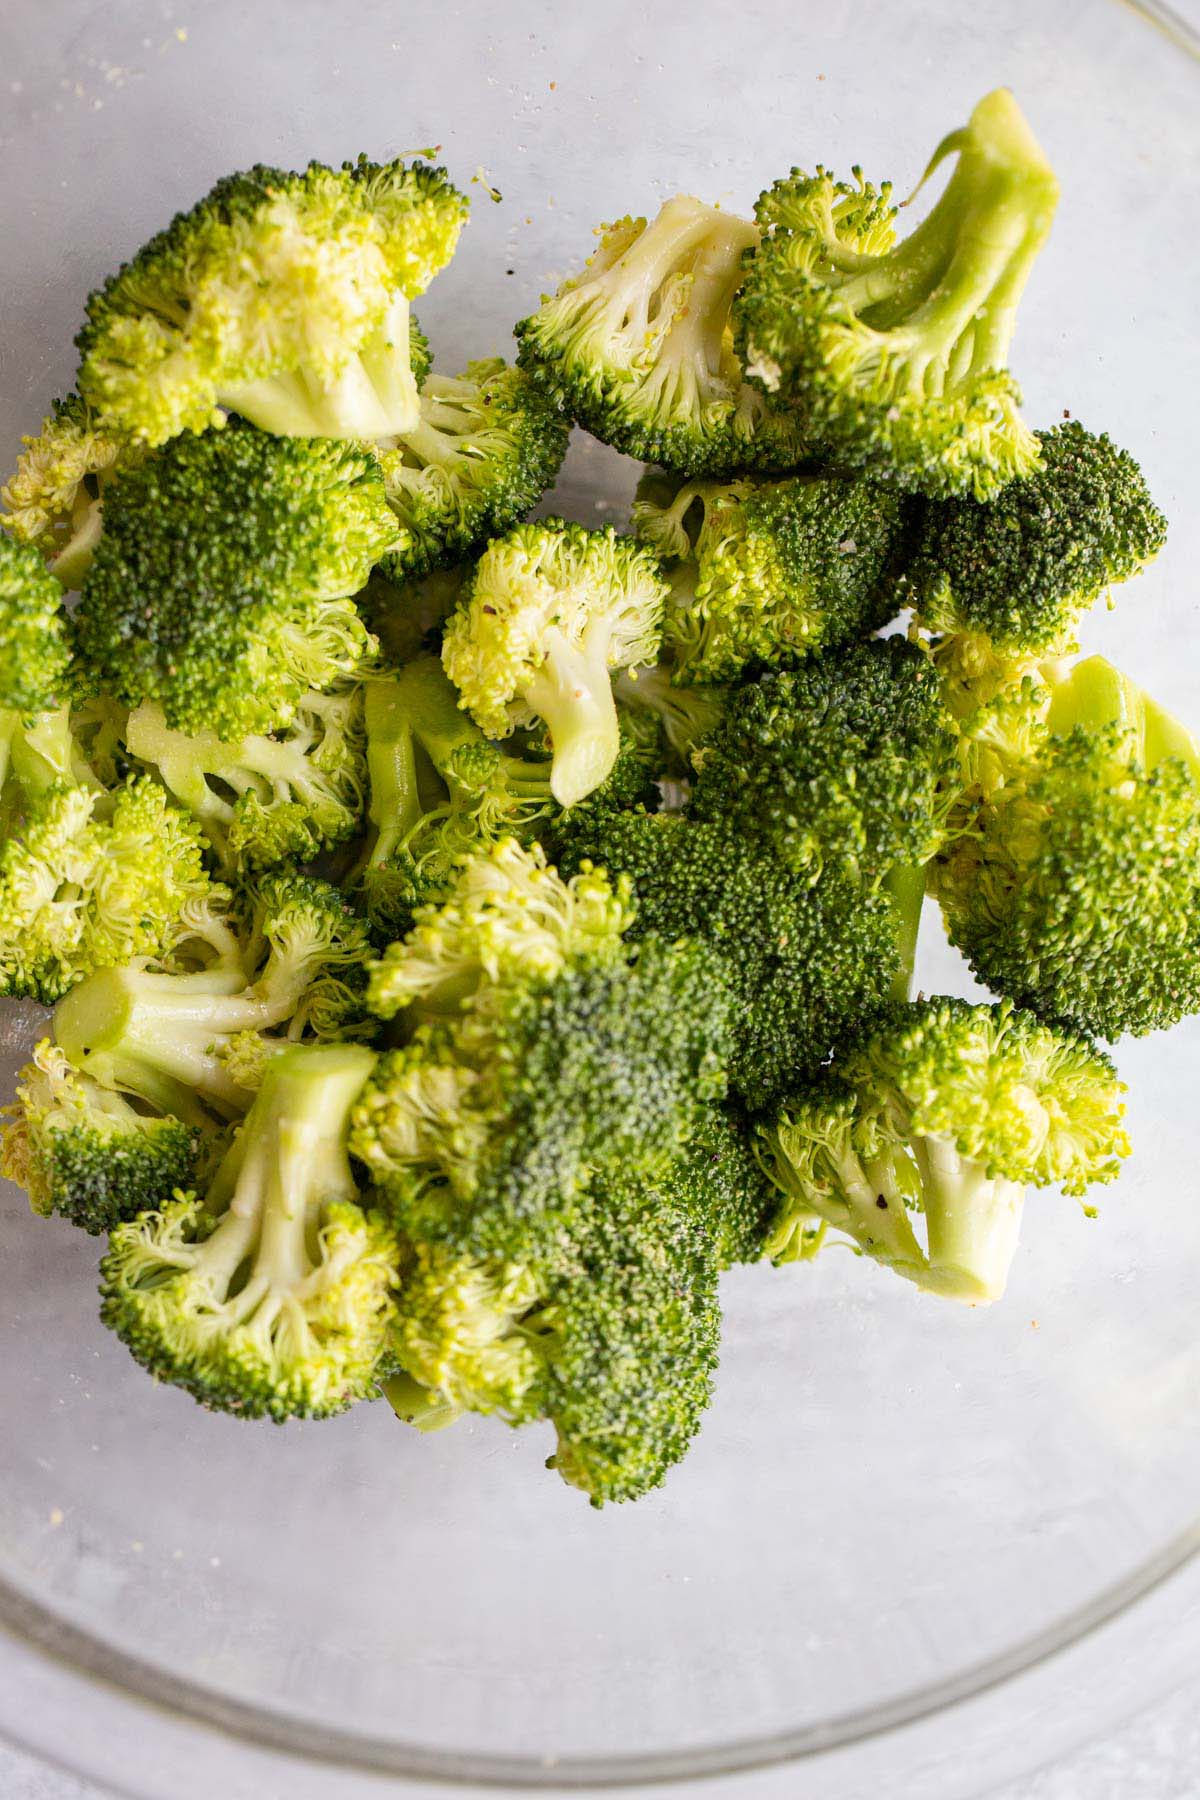 Broccoli tossed with oil and seasonings